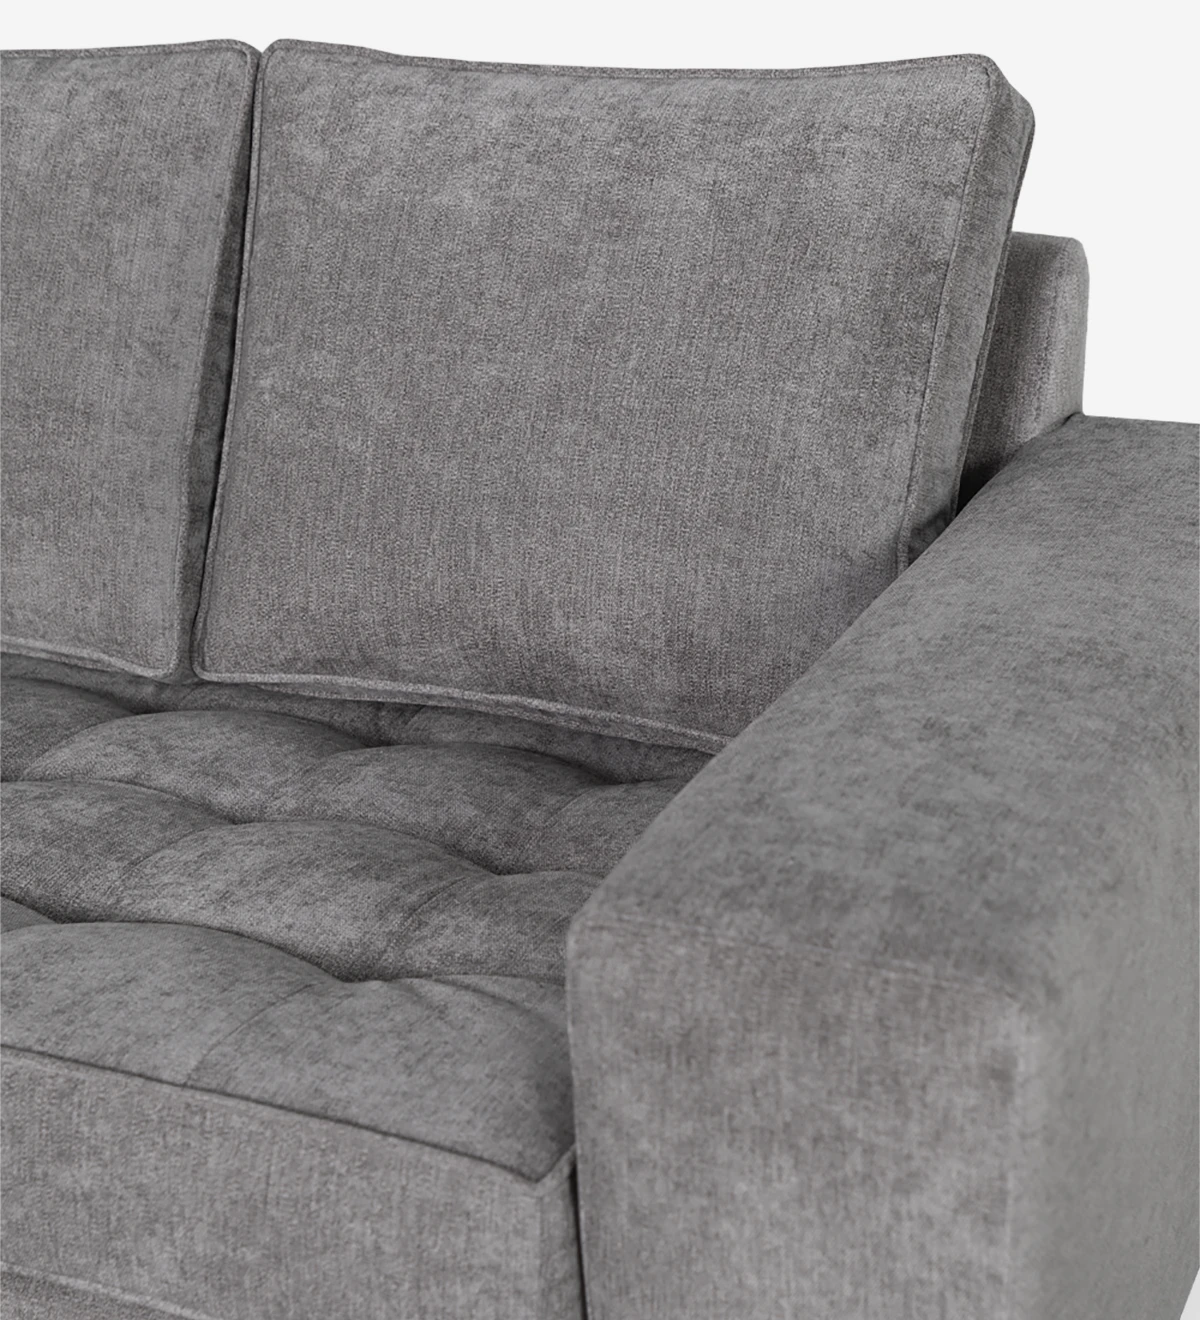 2 seater upholstered in frabric with black metallic feet.